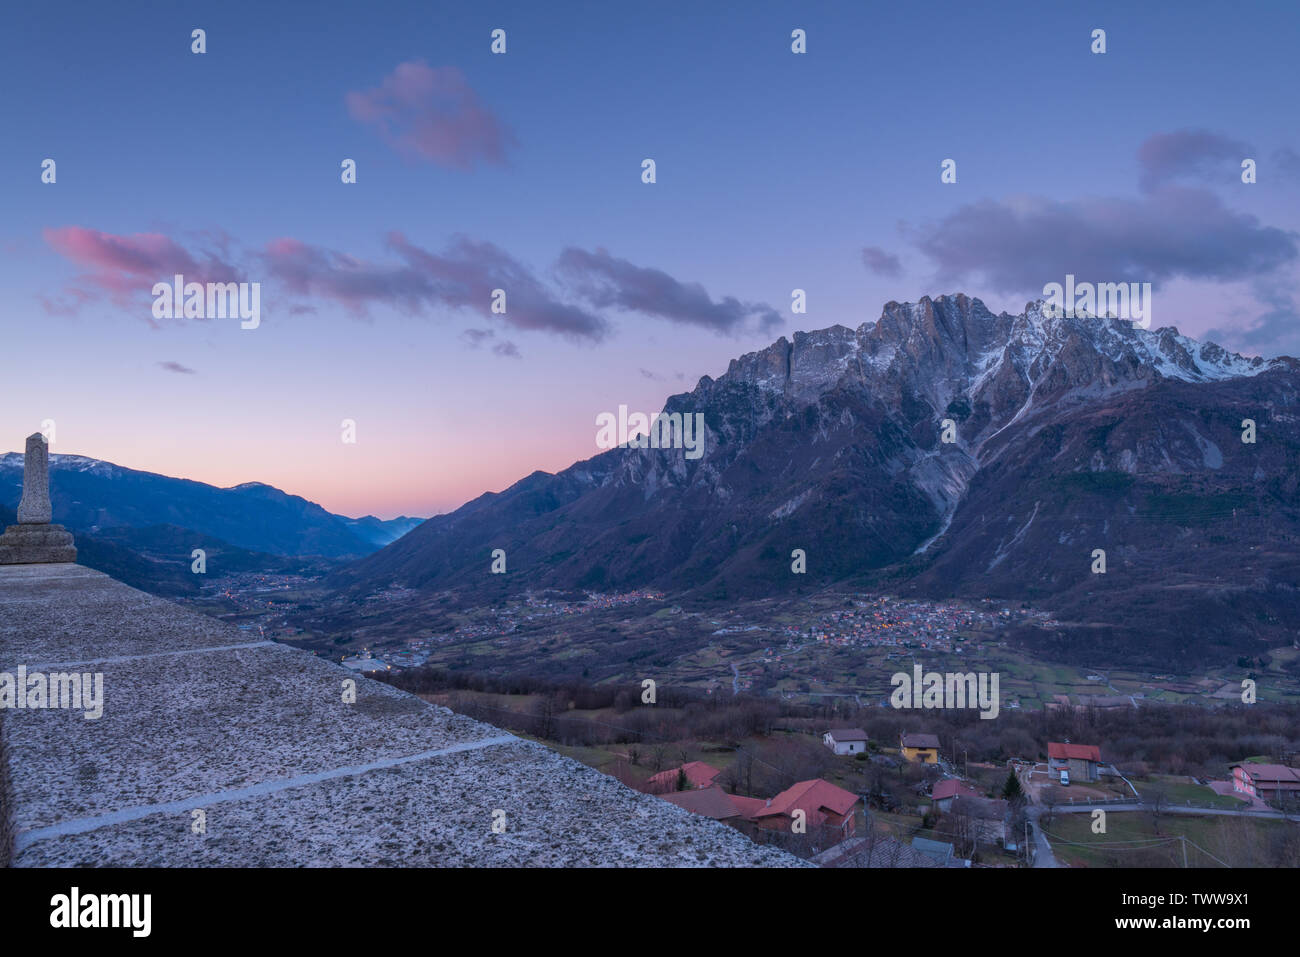 Sunrise over the town of Cimbergo in Val Camonica, Italy. Pink clouds over the mountains, colorful clouds at daybreak in the valley. Stock Photo